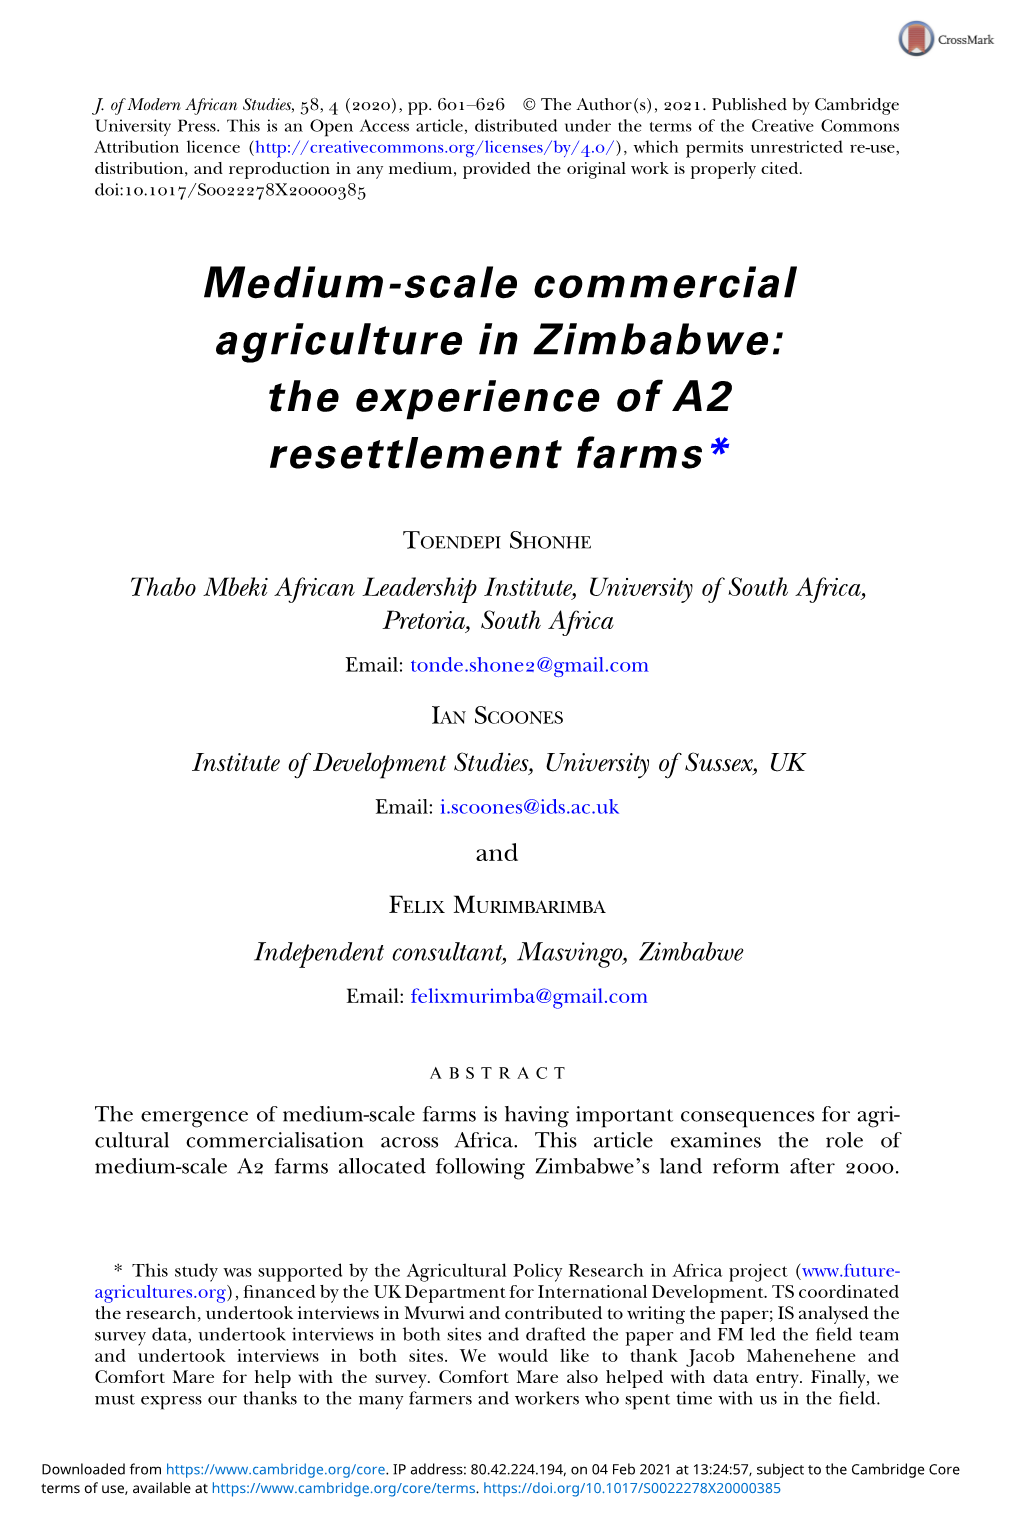 Medium-Scale Commercial Agriculture in Zimbabwe: the Experience of A2 Resettlement Farms*